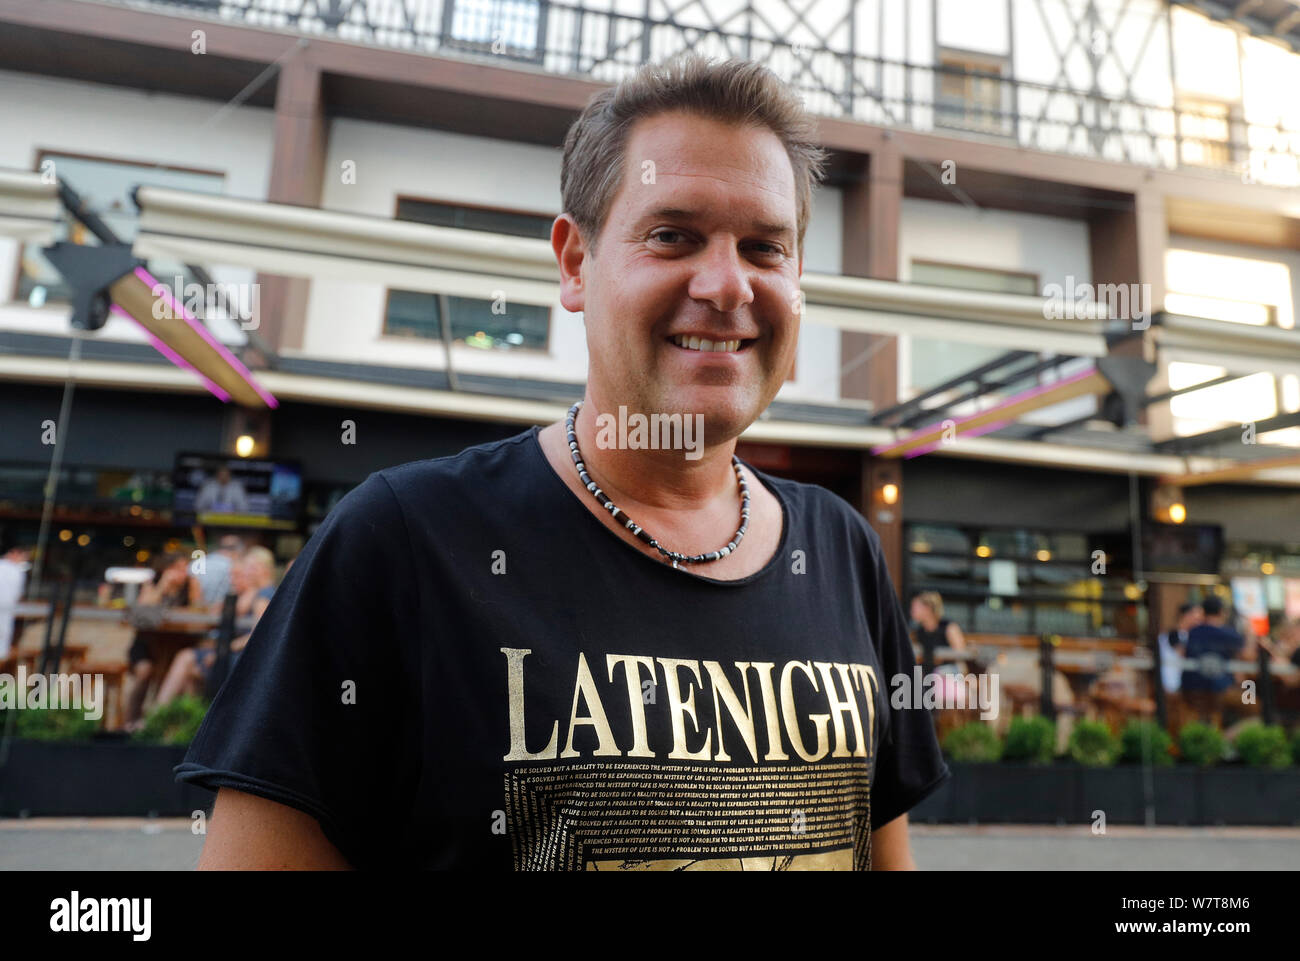 Palma, Spain. 23rd July, 2019. The German singer Peter Wackel stands in the  beer king. He is one of the most famous German singers at Playa de Palma.  Your fans know all